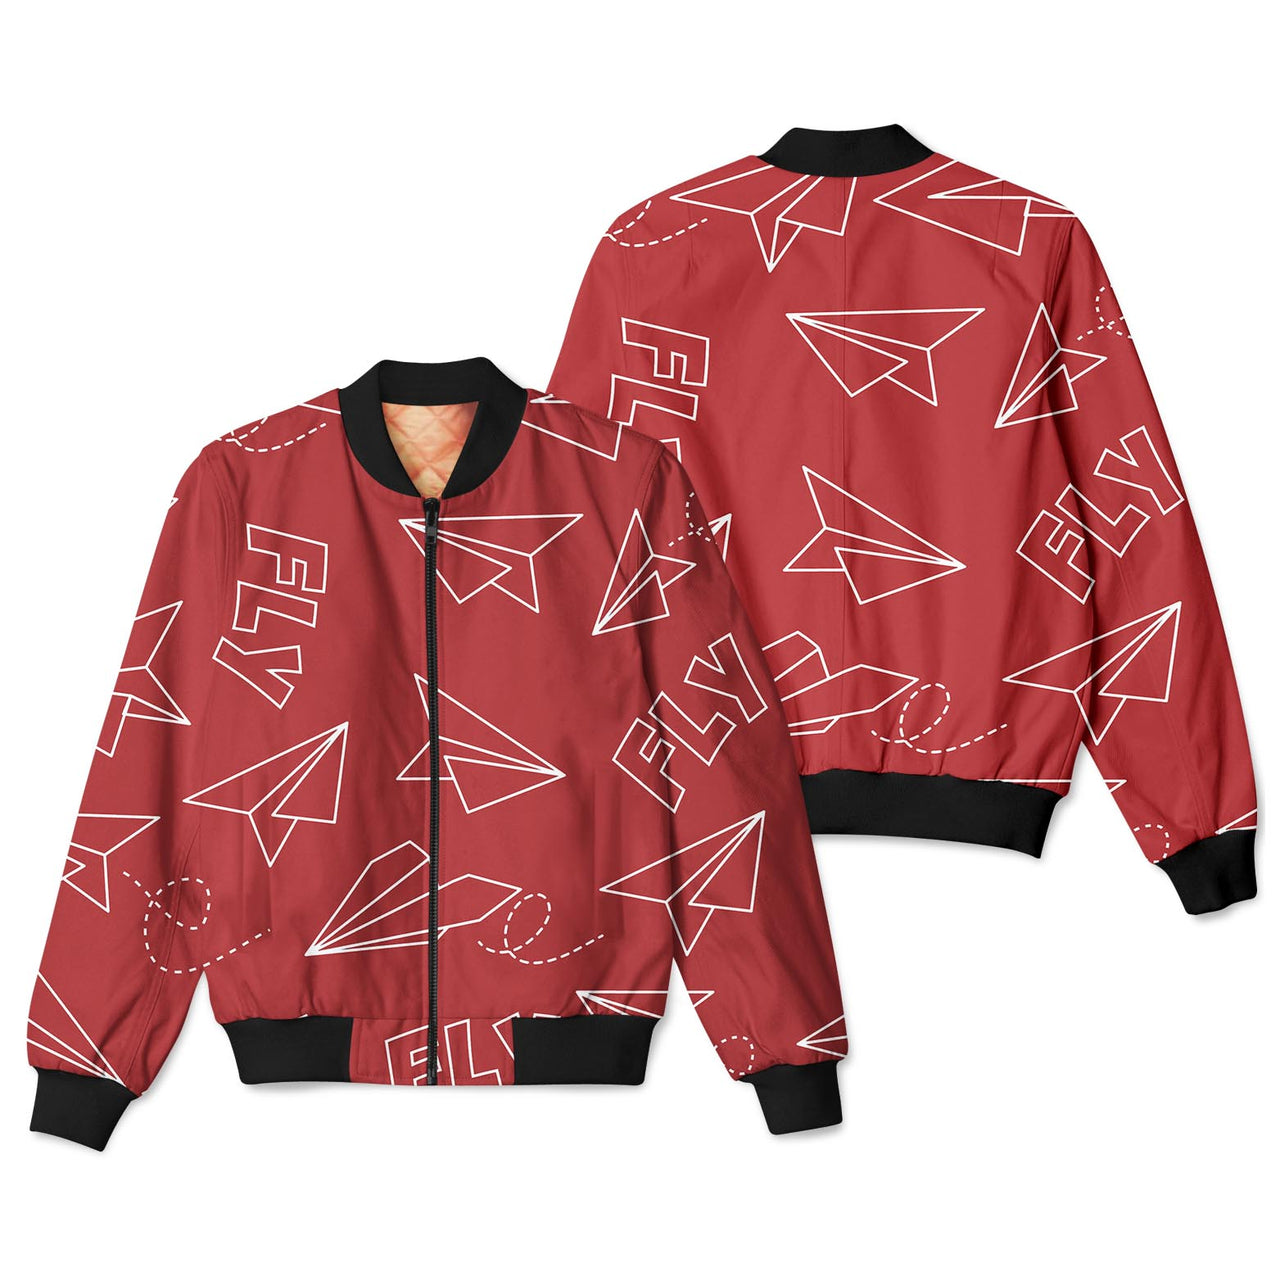 Paper Airplane & Fly (Red) Designed 3D Pilot Bomber Jackets